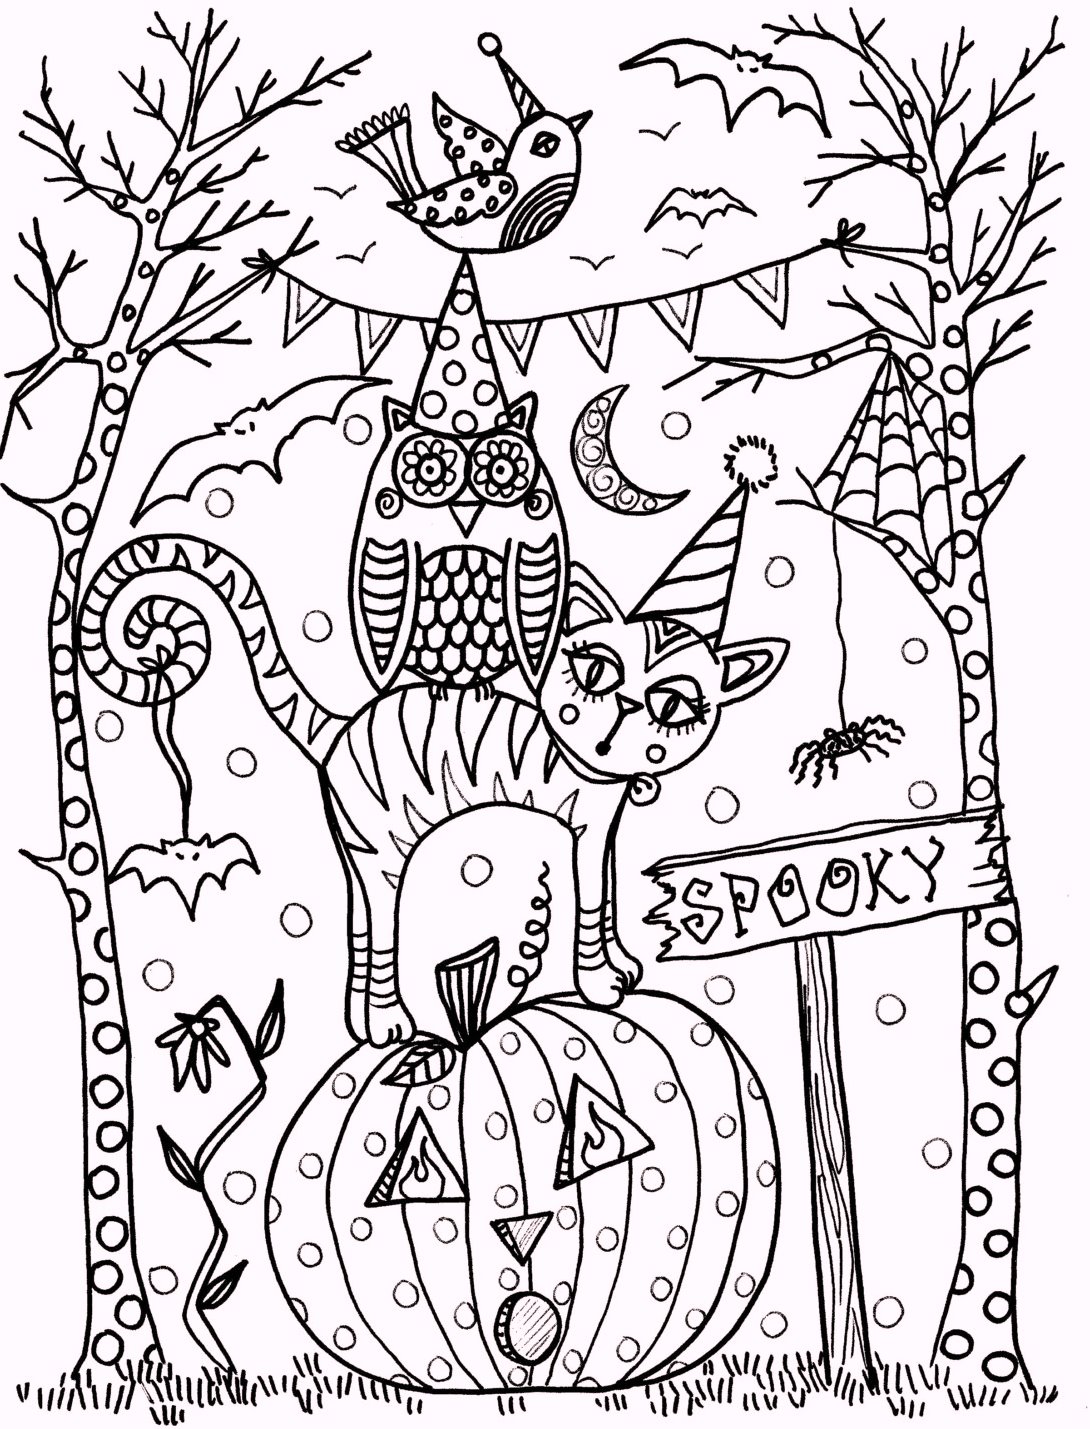 vintage-artistic-halloween-coloring-pages